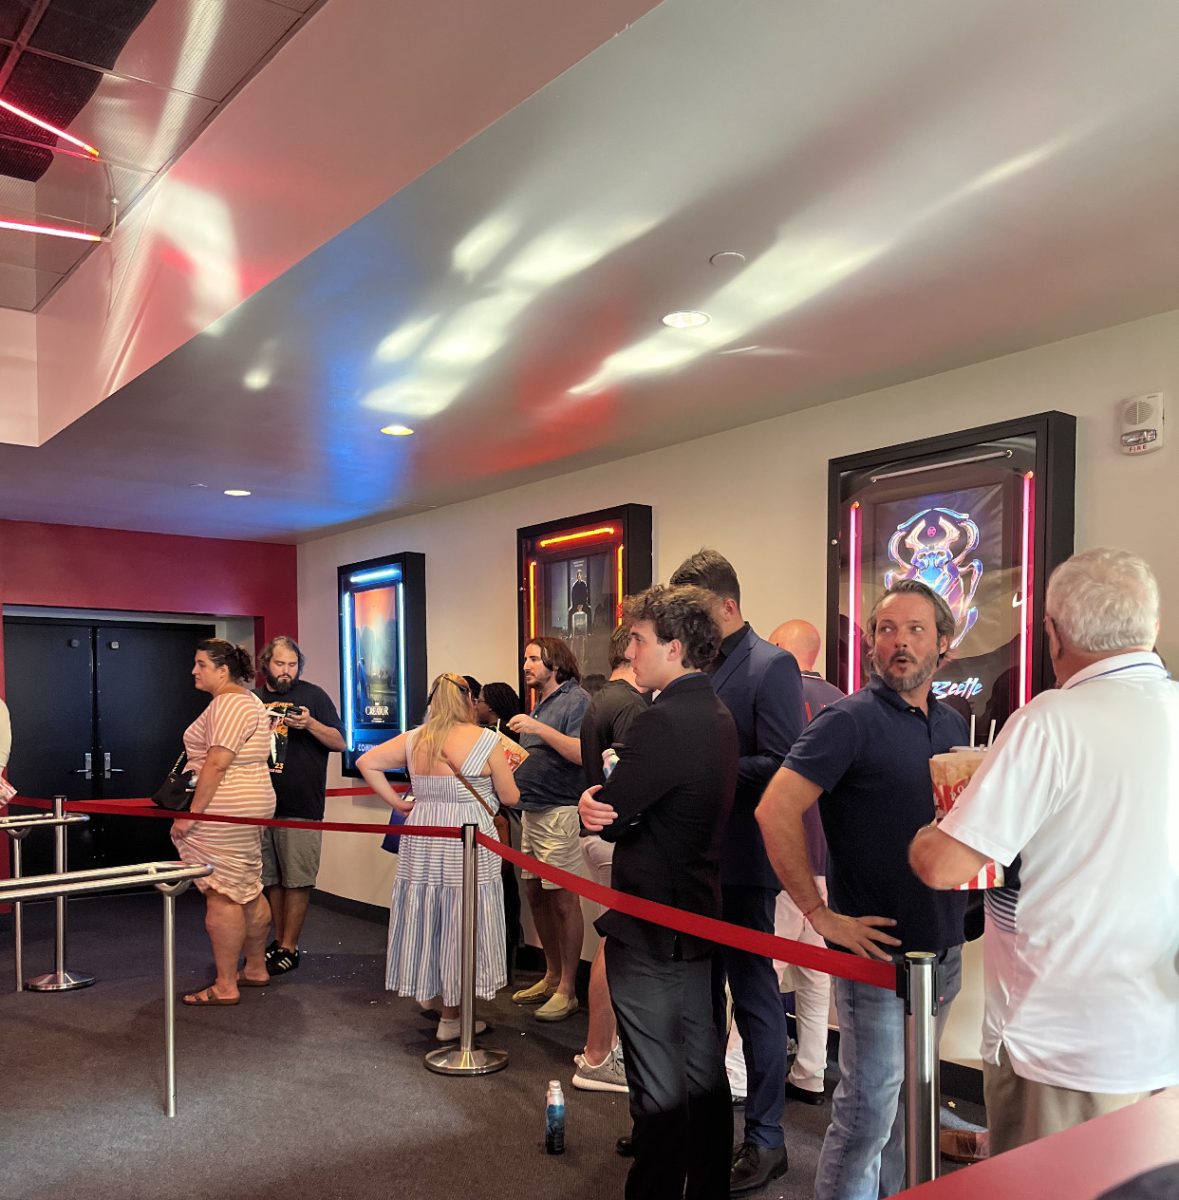 Moviegoers wait in line to see Oppenheimer at the AutoNation IMAX Theater in Fort Lauderdale, FL.